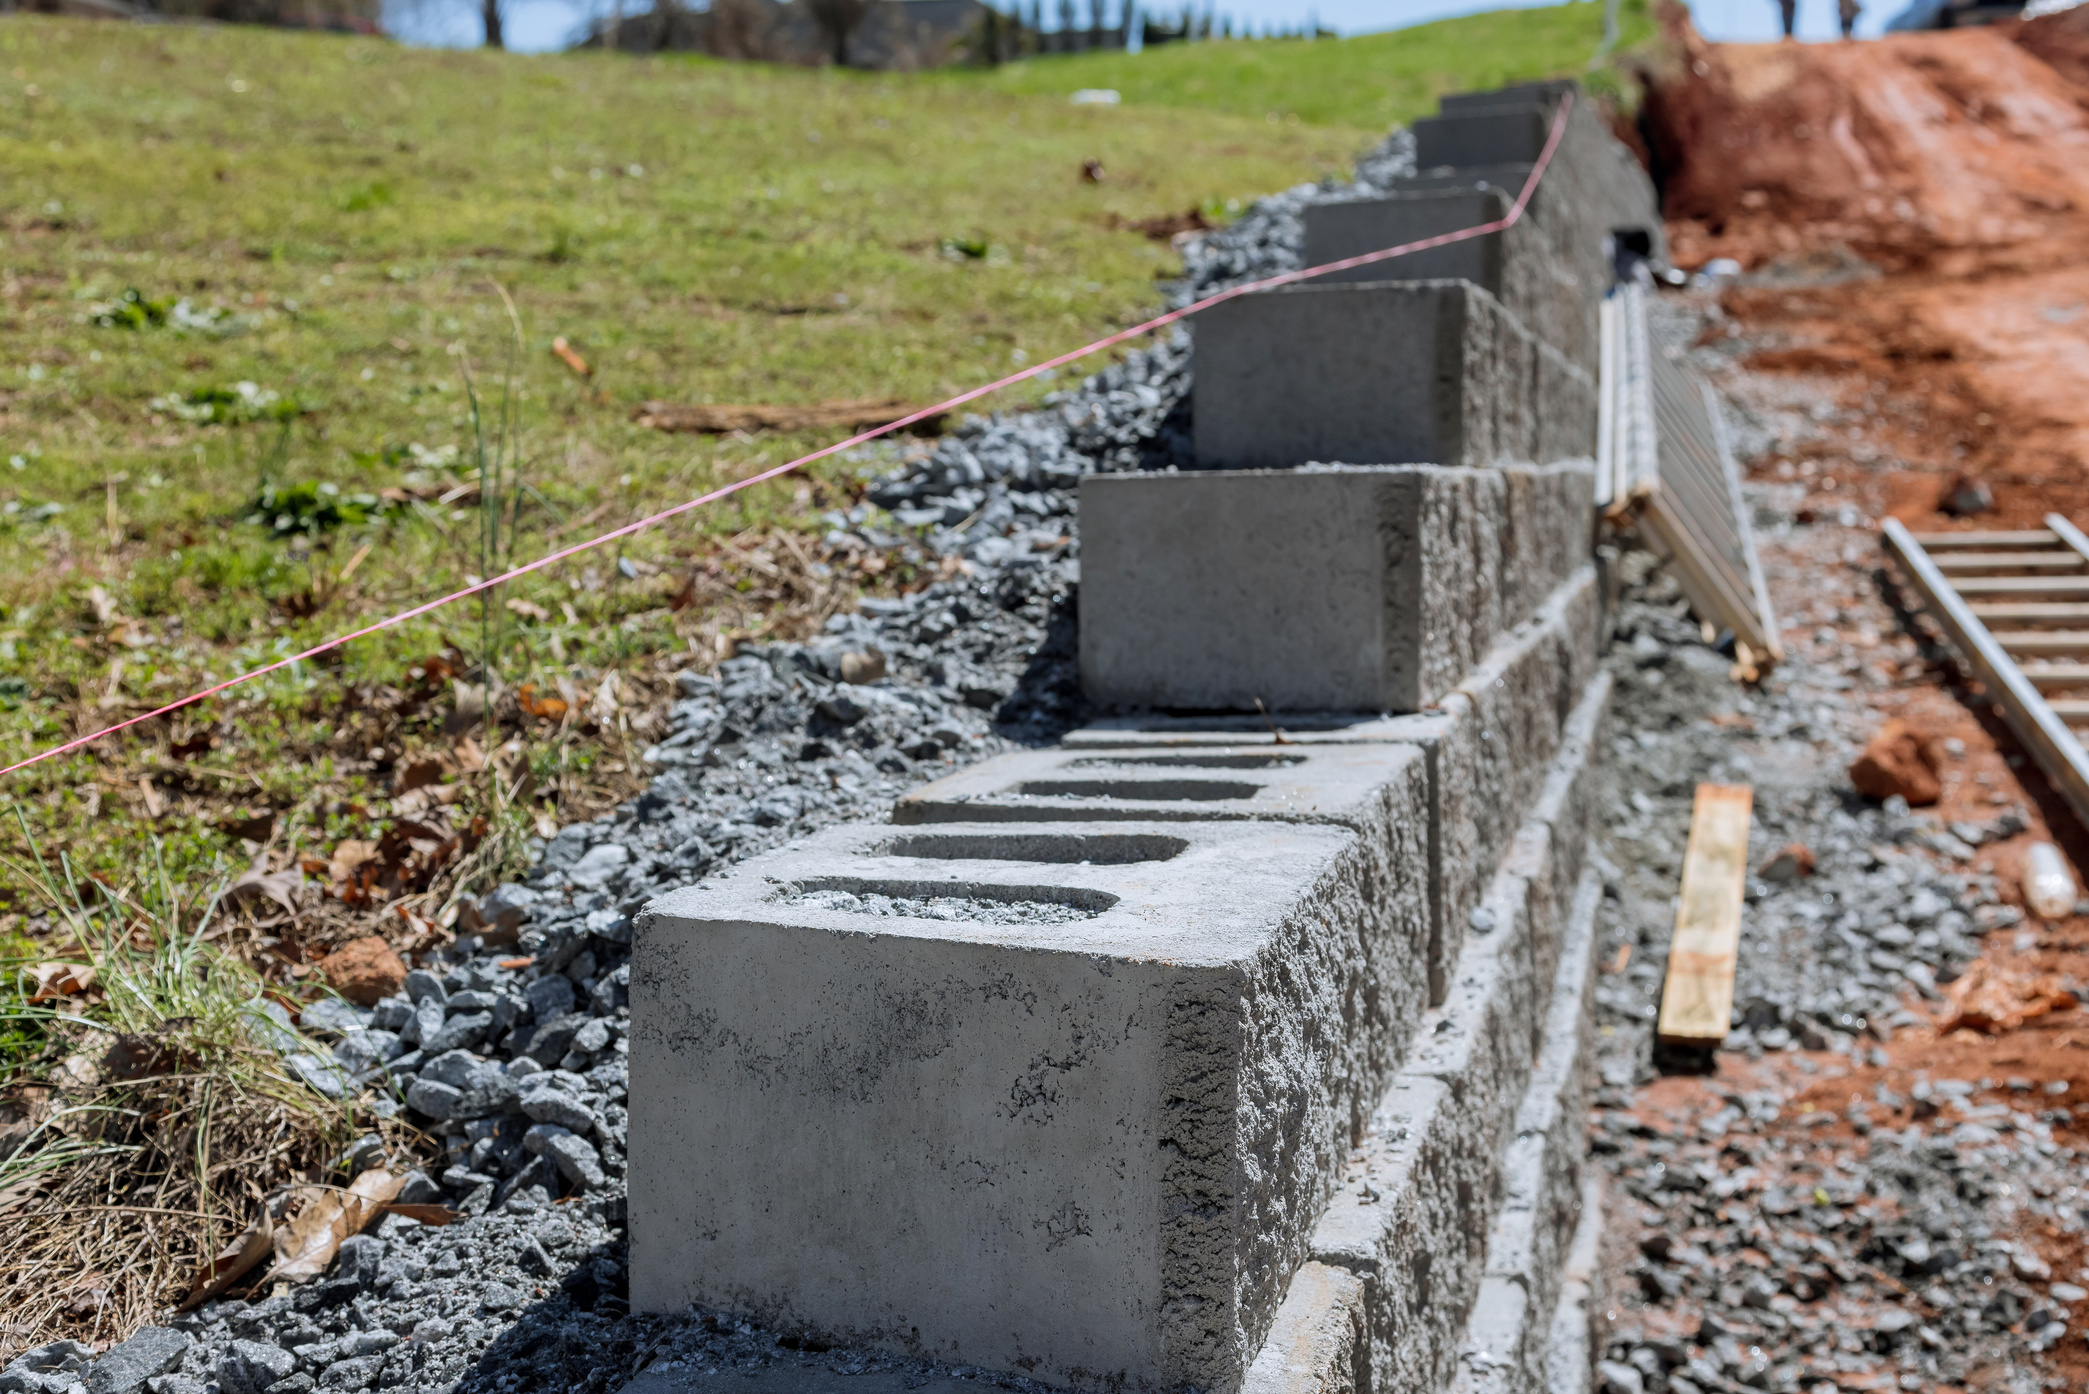 It was necessary to build a retaining wall on a property to near new home